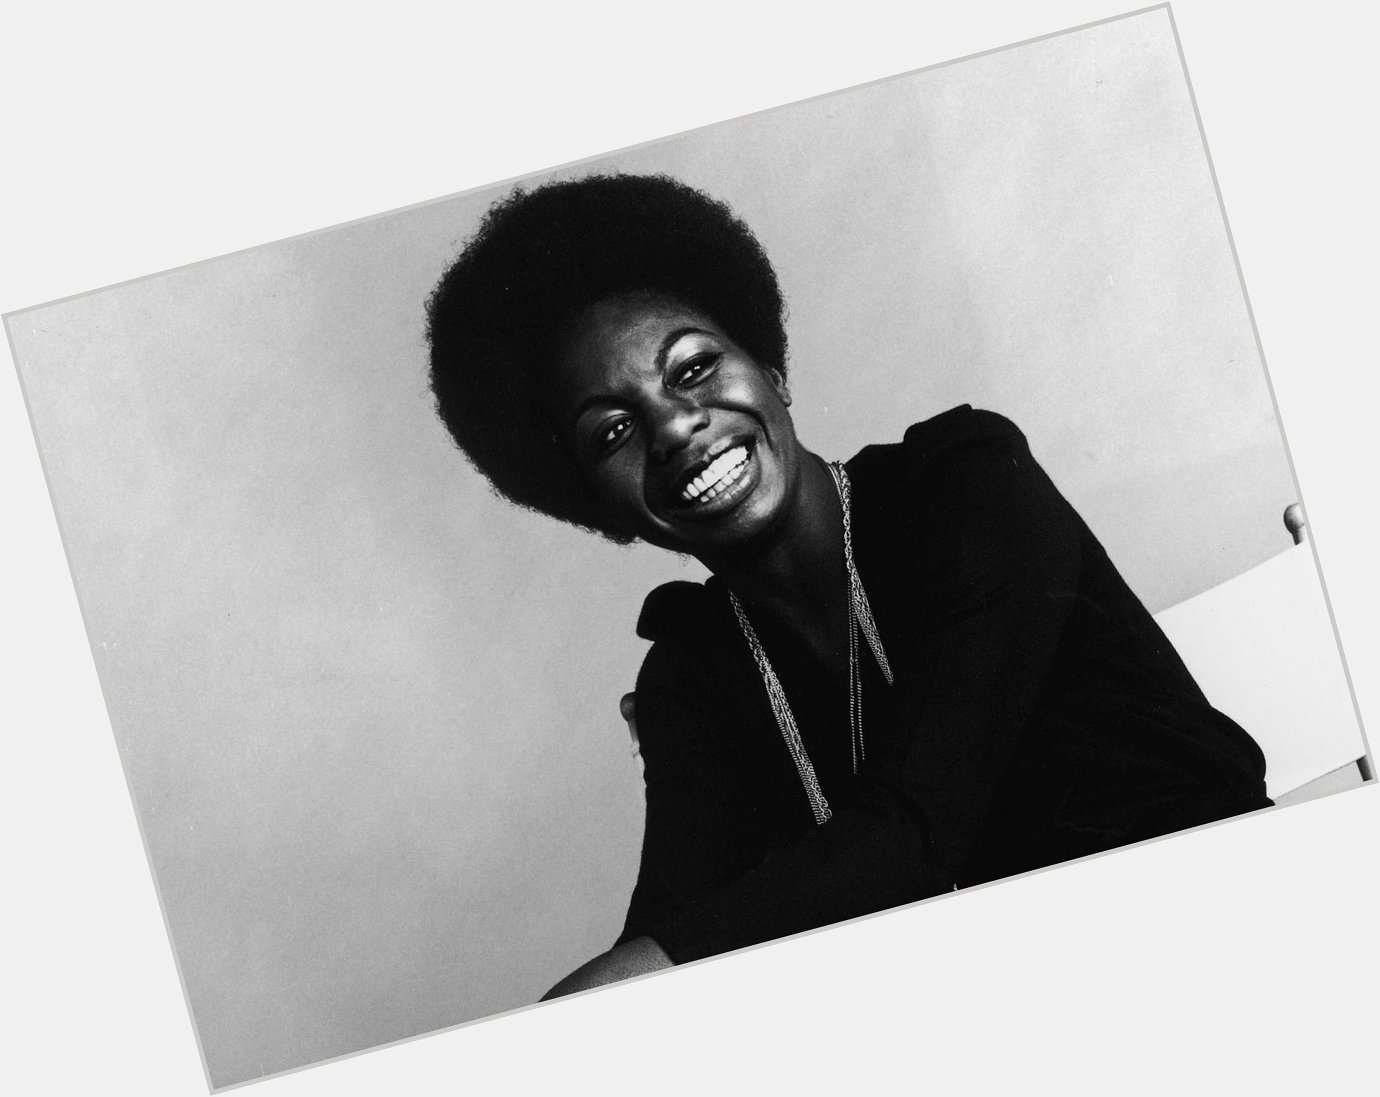 Happy birthday to Nina Simone who would have been 88 today! Those three albums will forever be my favorites. 